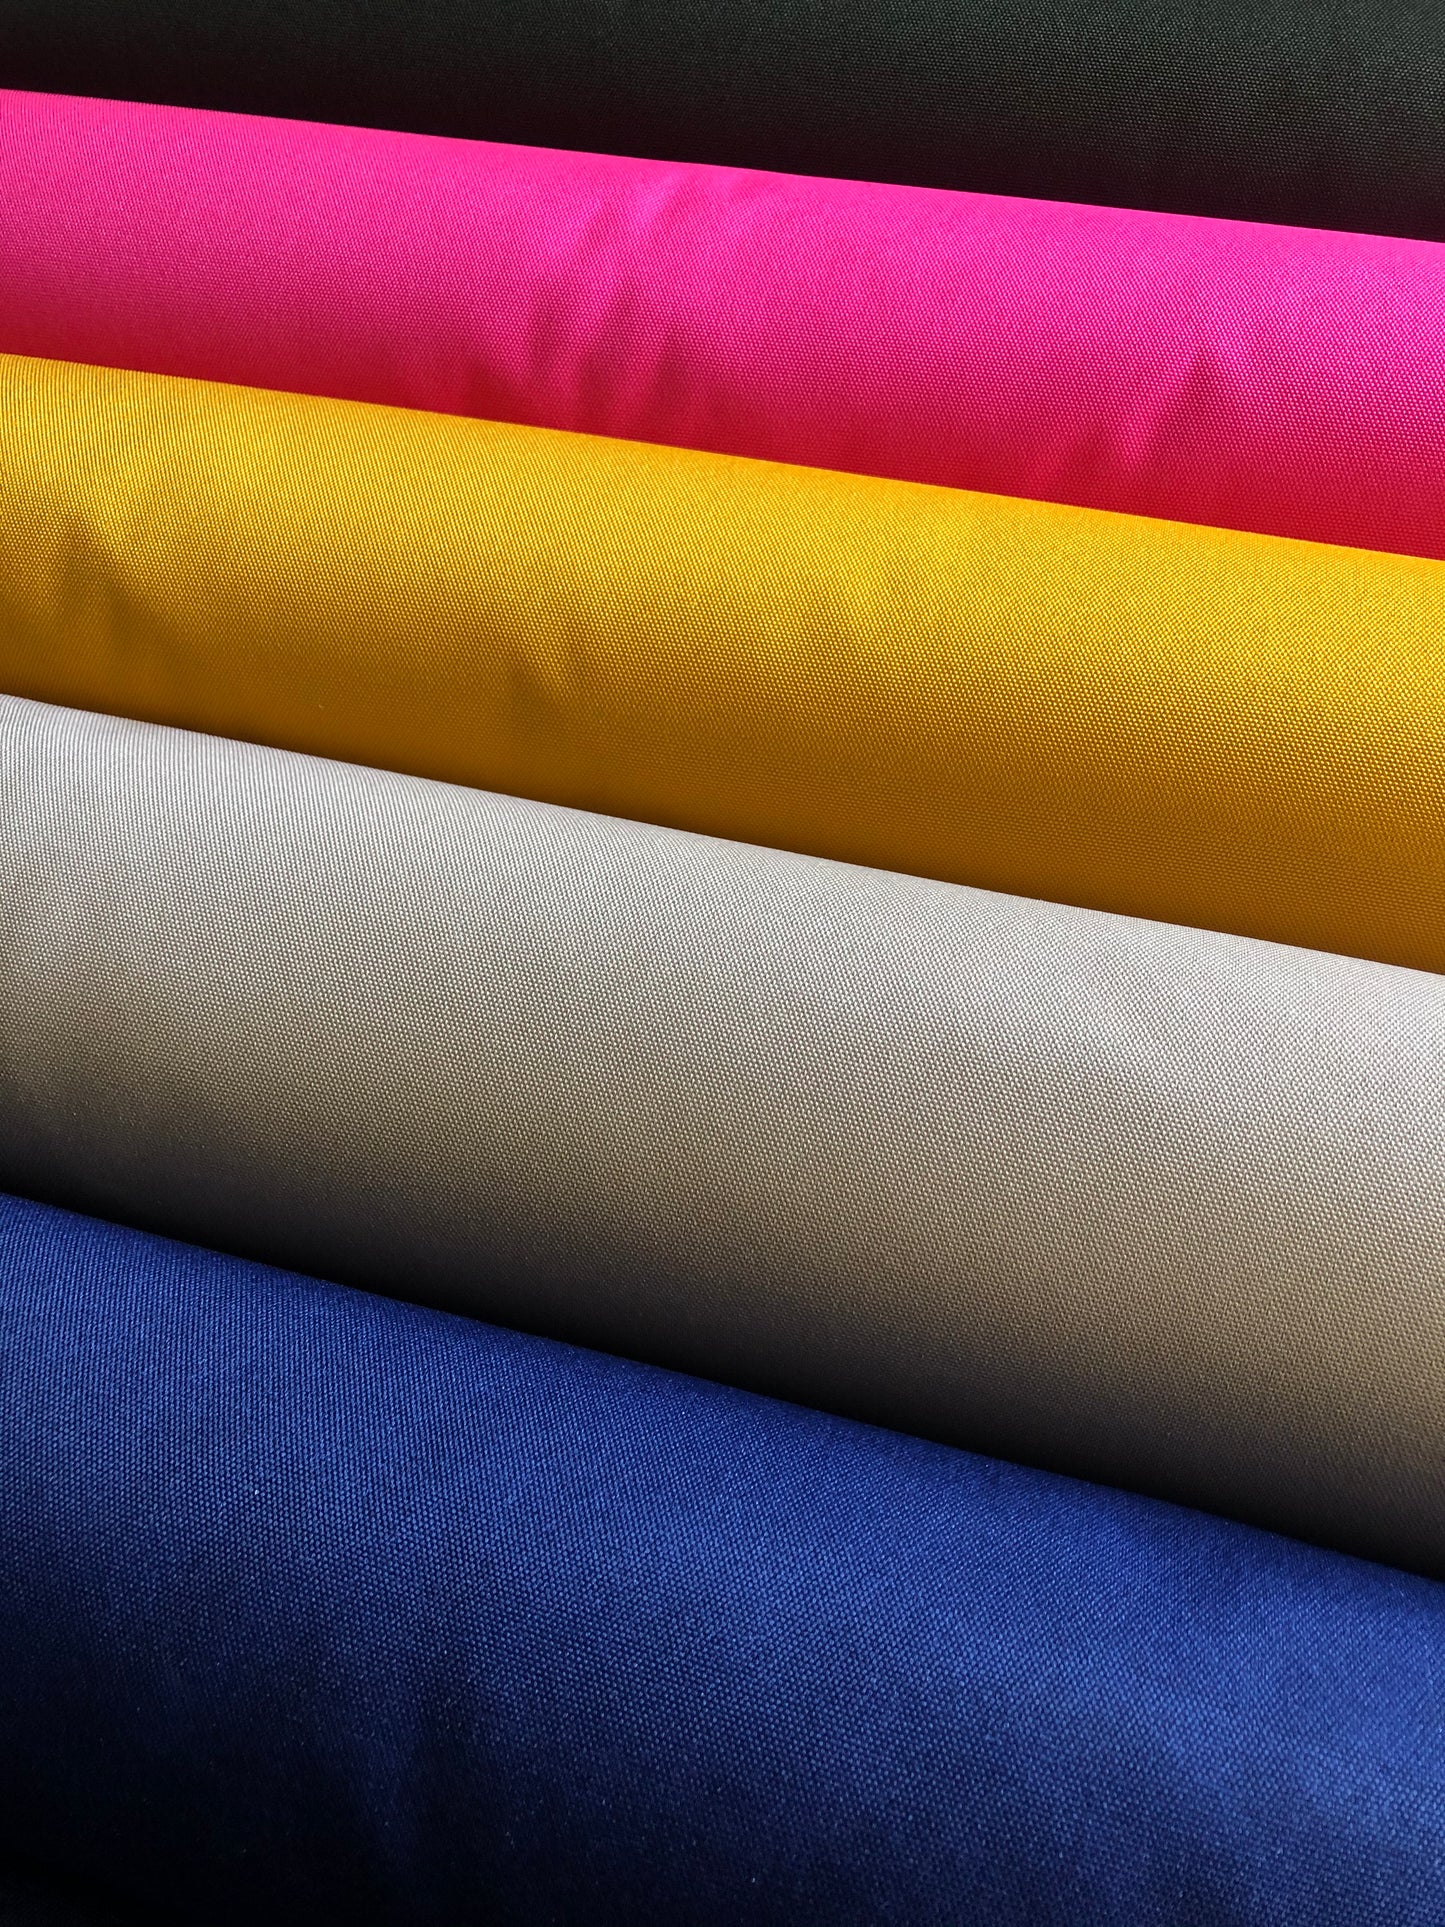 1m of Recycled Waterproof canvas for bags, home decor, outdoor wear, tent, tablecloth, cushion cover, curtains